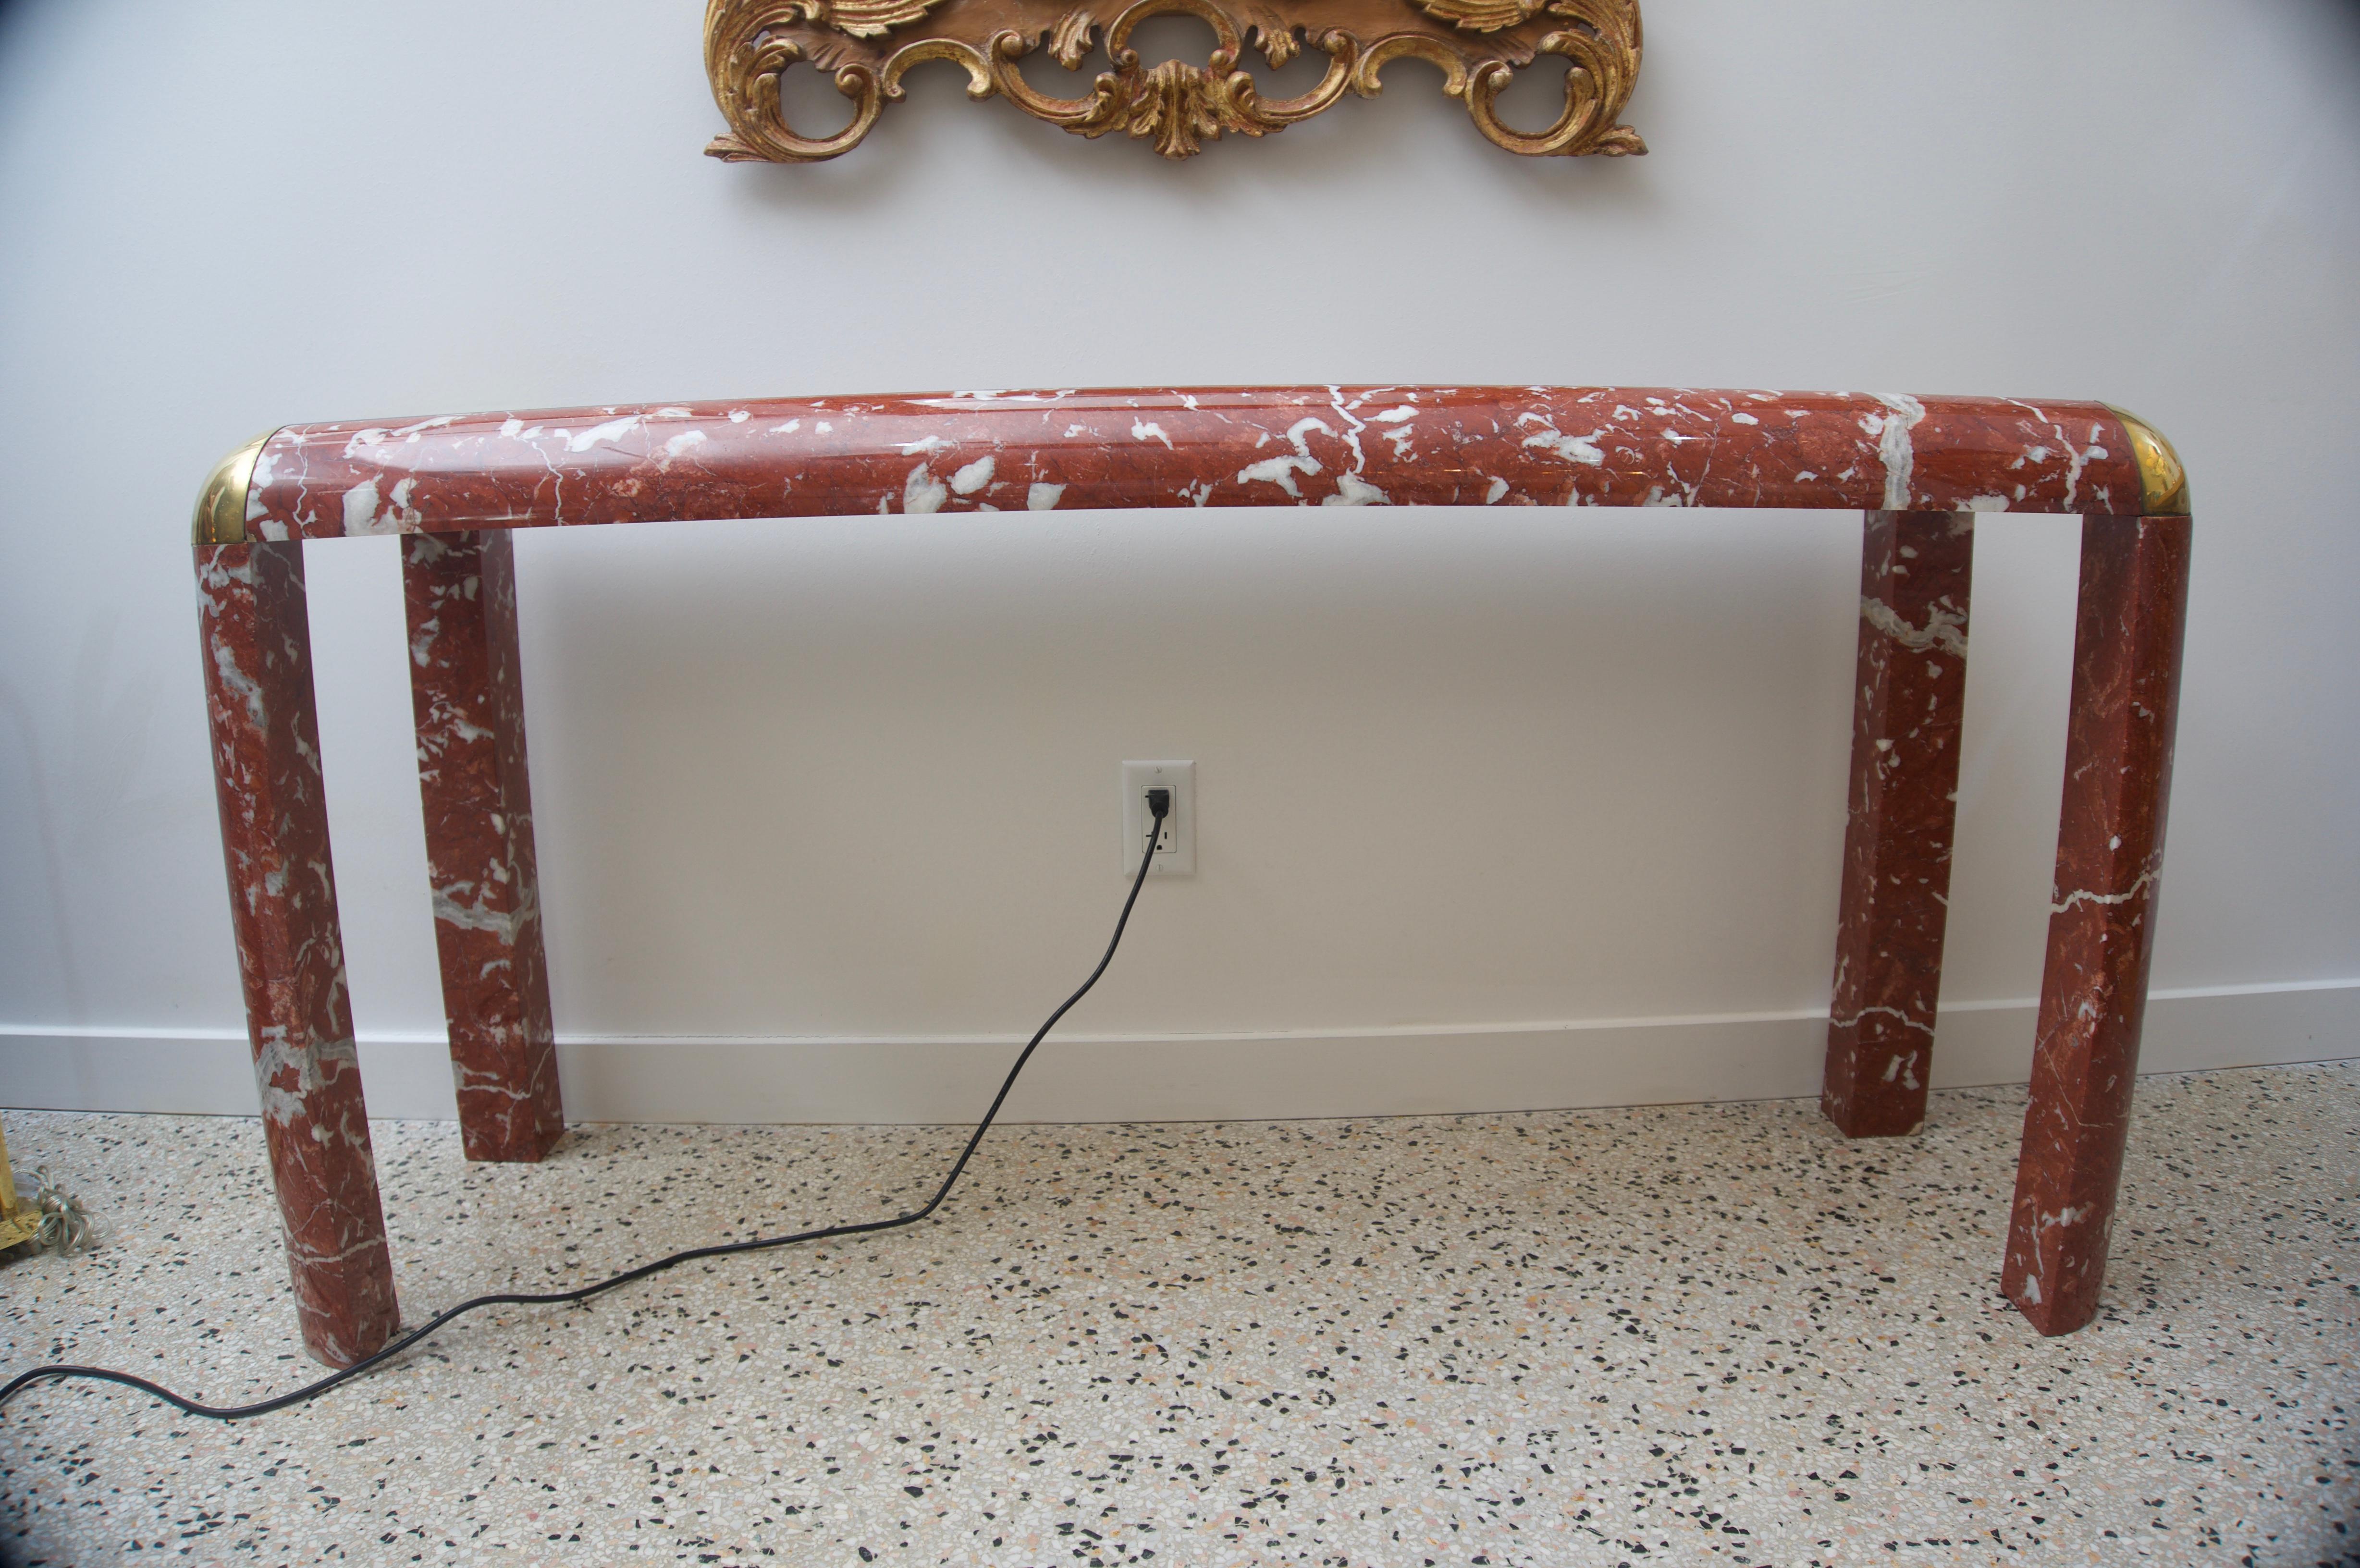 This stylish console table is by the iconic designer Karl Springer and was acquired from a palm beach estate.